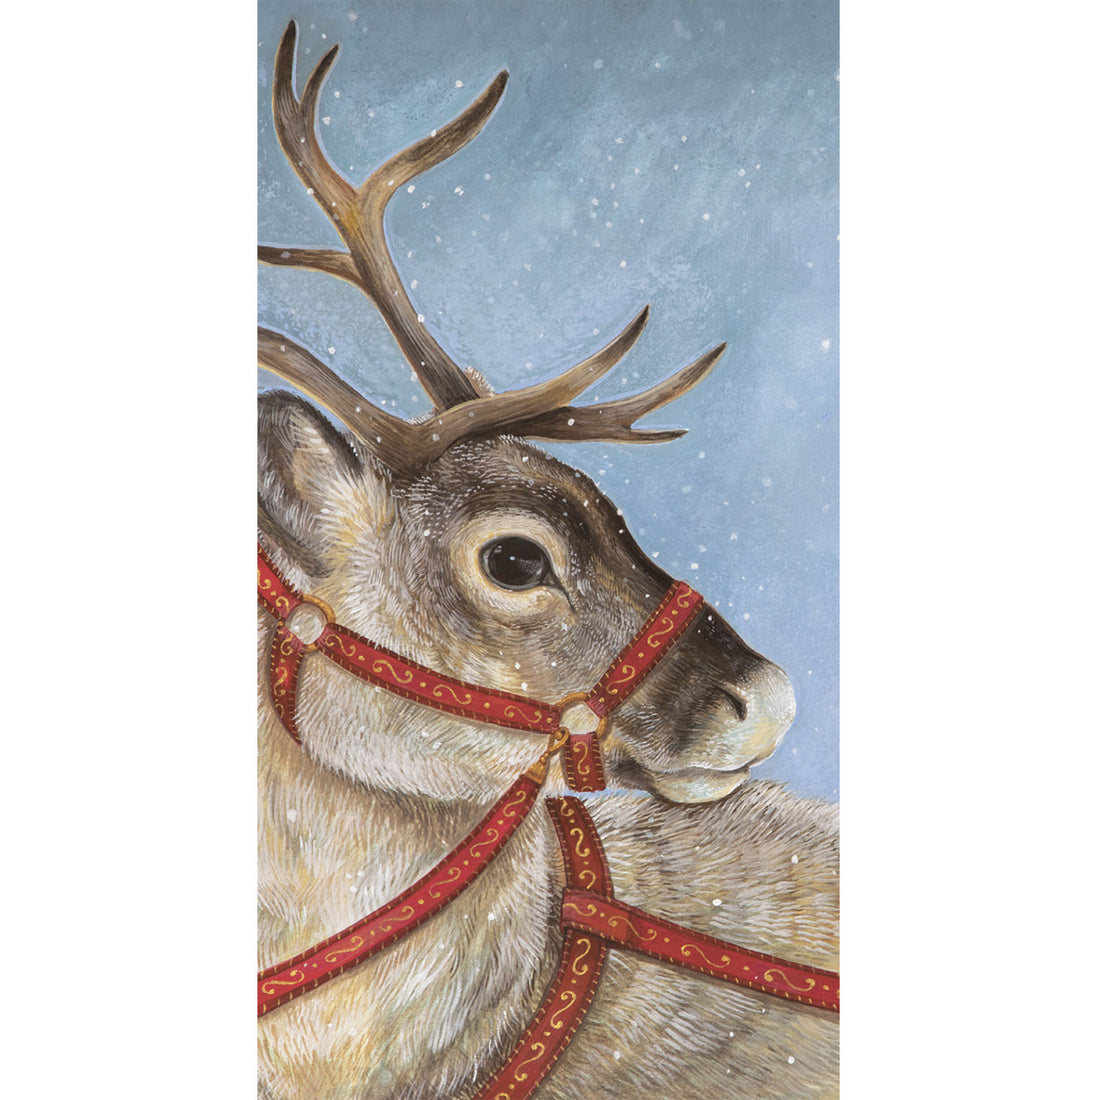 A rectangle guest napkin featuring a realistic painting of a reindeer wearing red reins, on a blue background with white snowflakes.